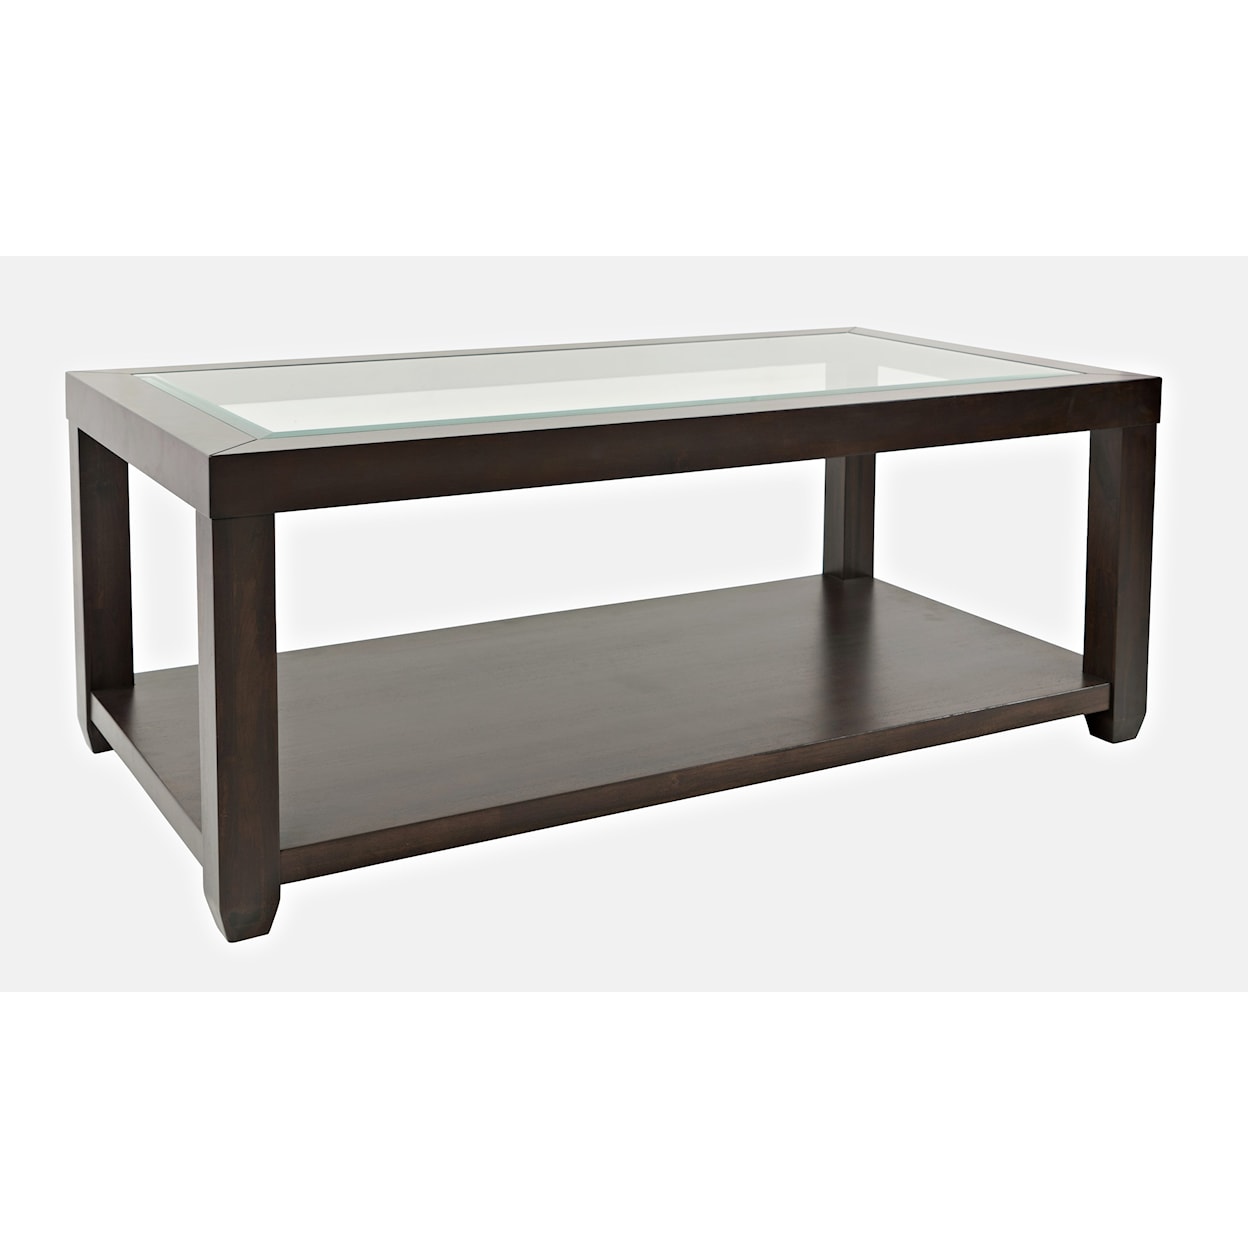 Jofran Rhianna Rectangle Castered Cocktail Table